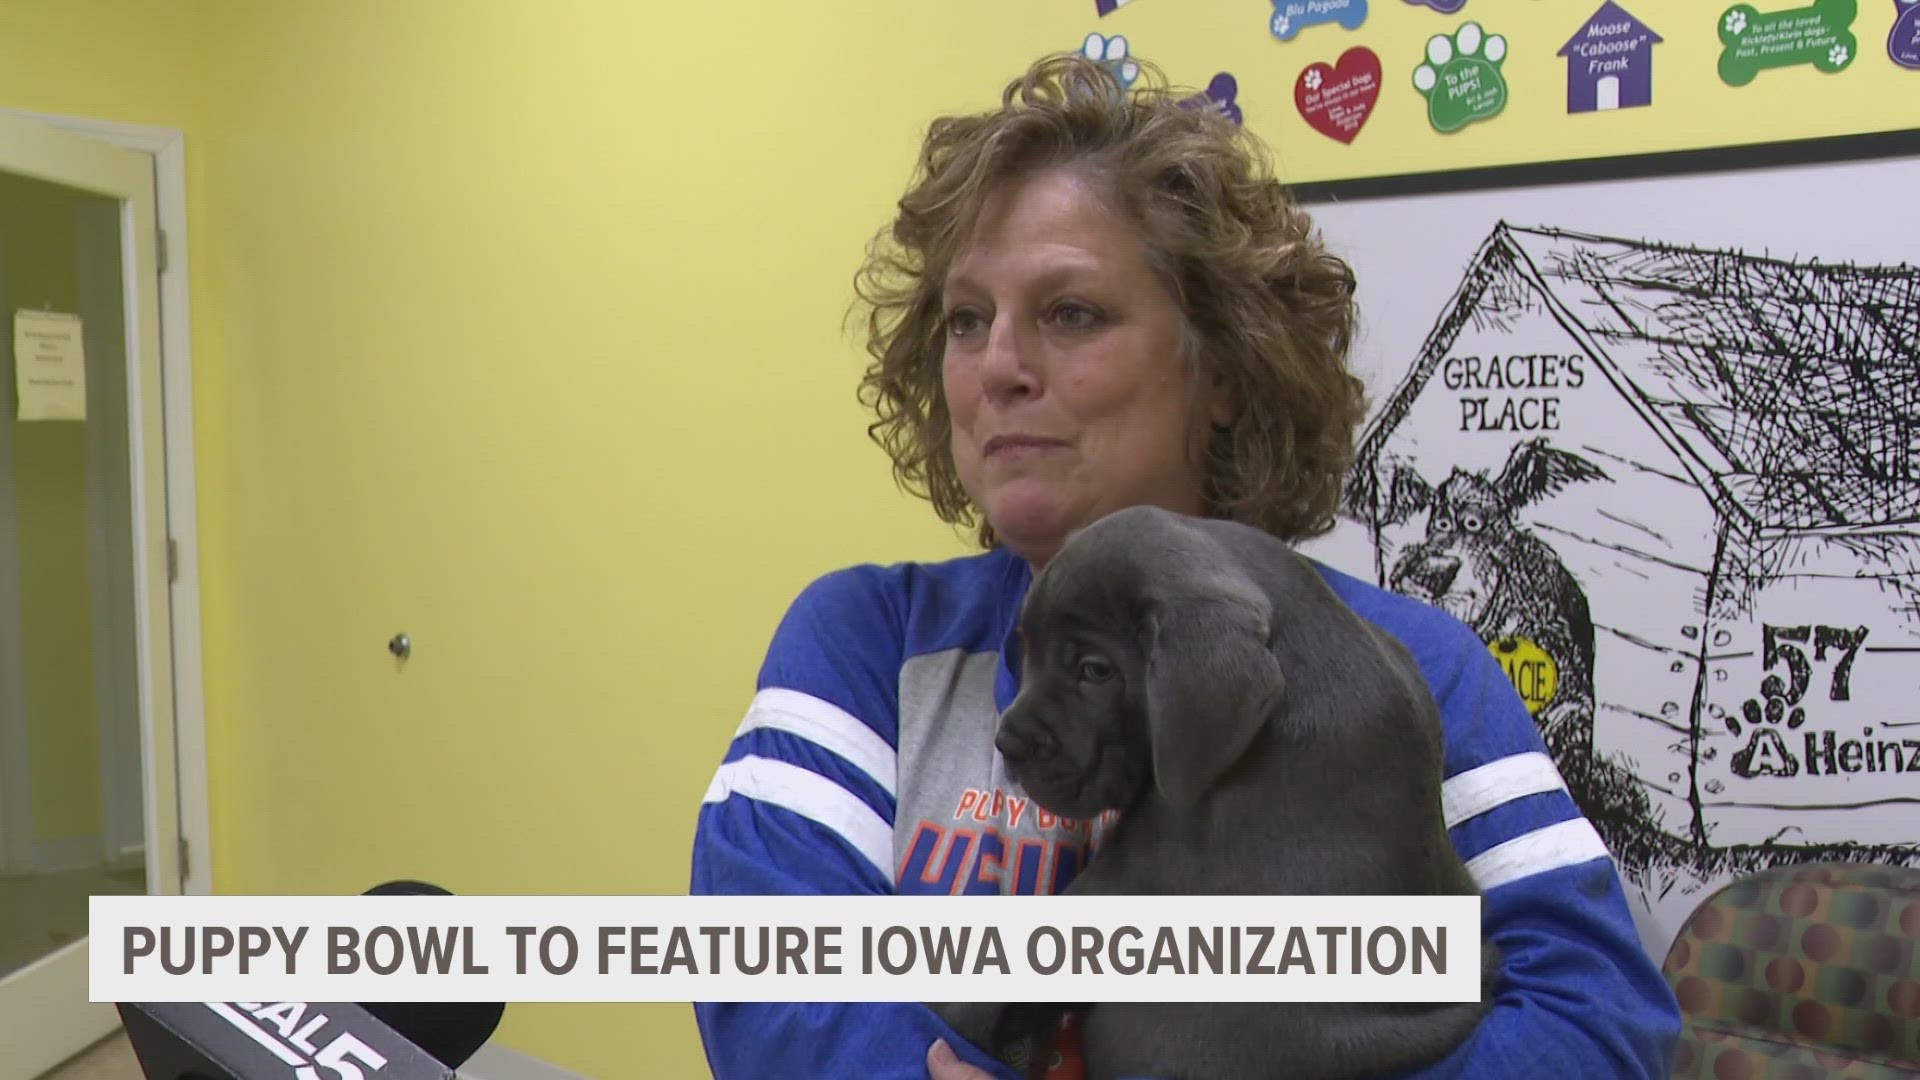 This is the 12th year AHeinz57 has sent rescue dogs to the Puppy Bowl